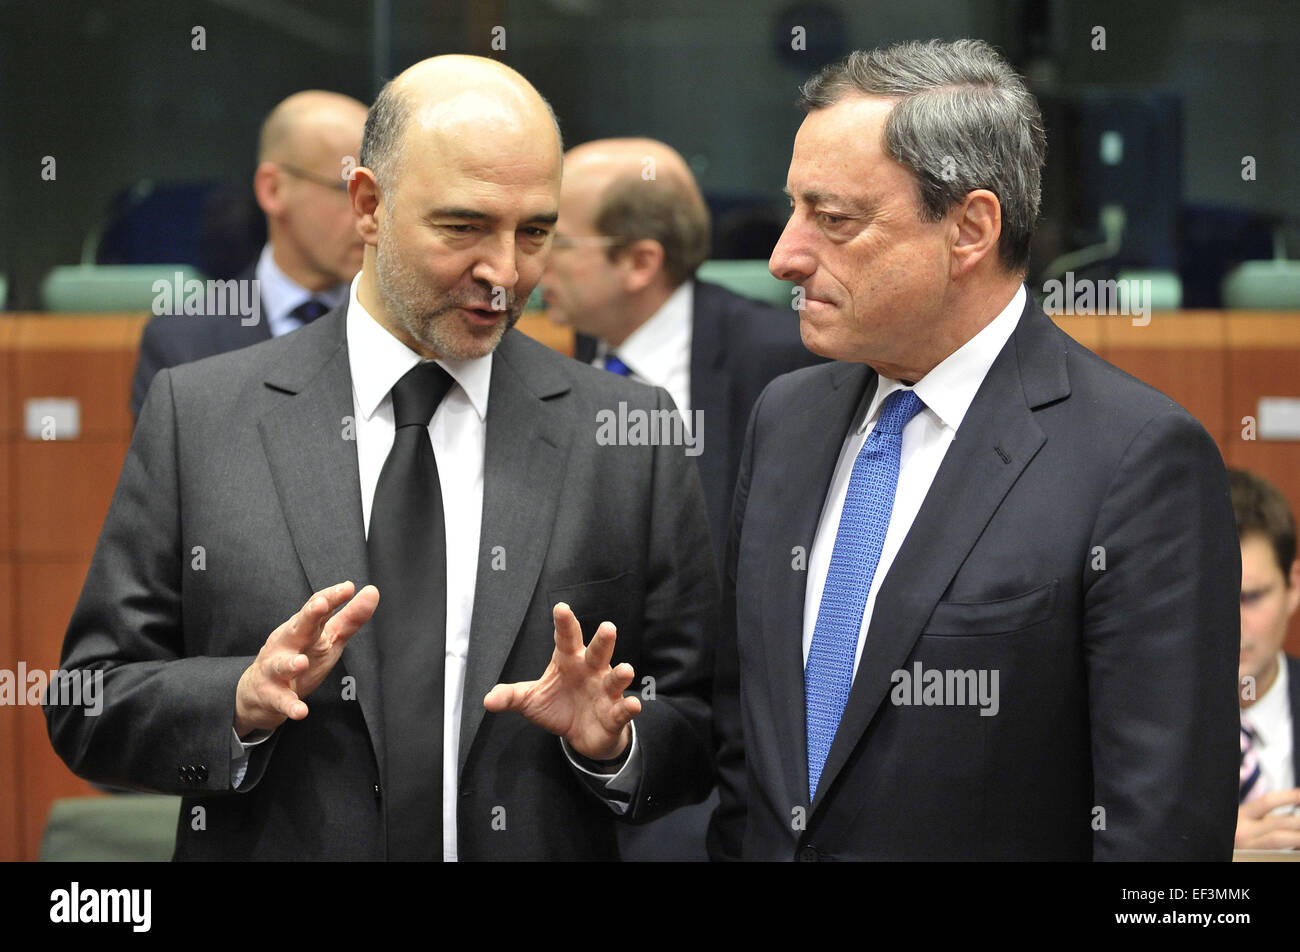 (150126) -- BRUSSELS, Jan. 26, 2015 (Xinhua) -- European Commissioner for Economic and Financial Affairs, Taxation and Customs Pierre Moscovici (L) speaks with European Central Bank (ECB) President Mario Draghi prior to an Eurogroup finance ministers meeting at EU headquarters in Brussels, Belgium, Jan. 26, 2015. (Xinhua/Ye Pingfan) Stock Photo